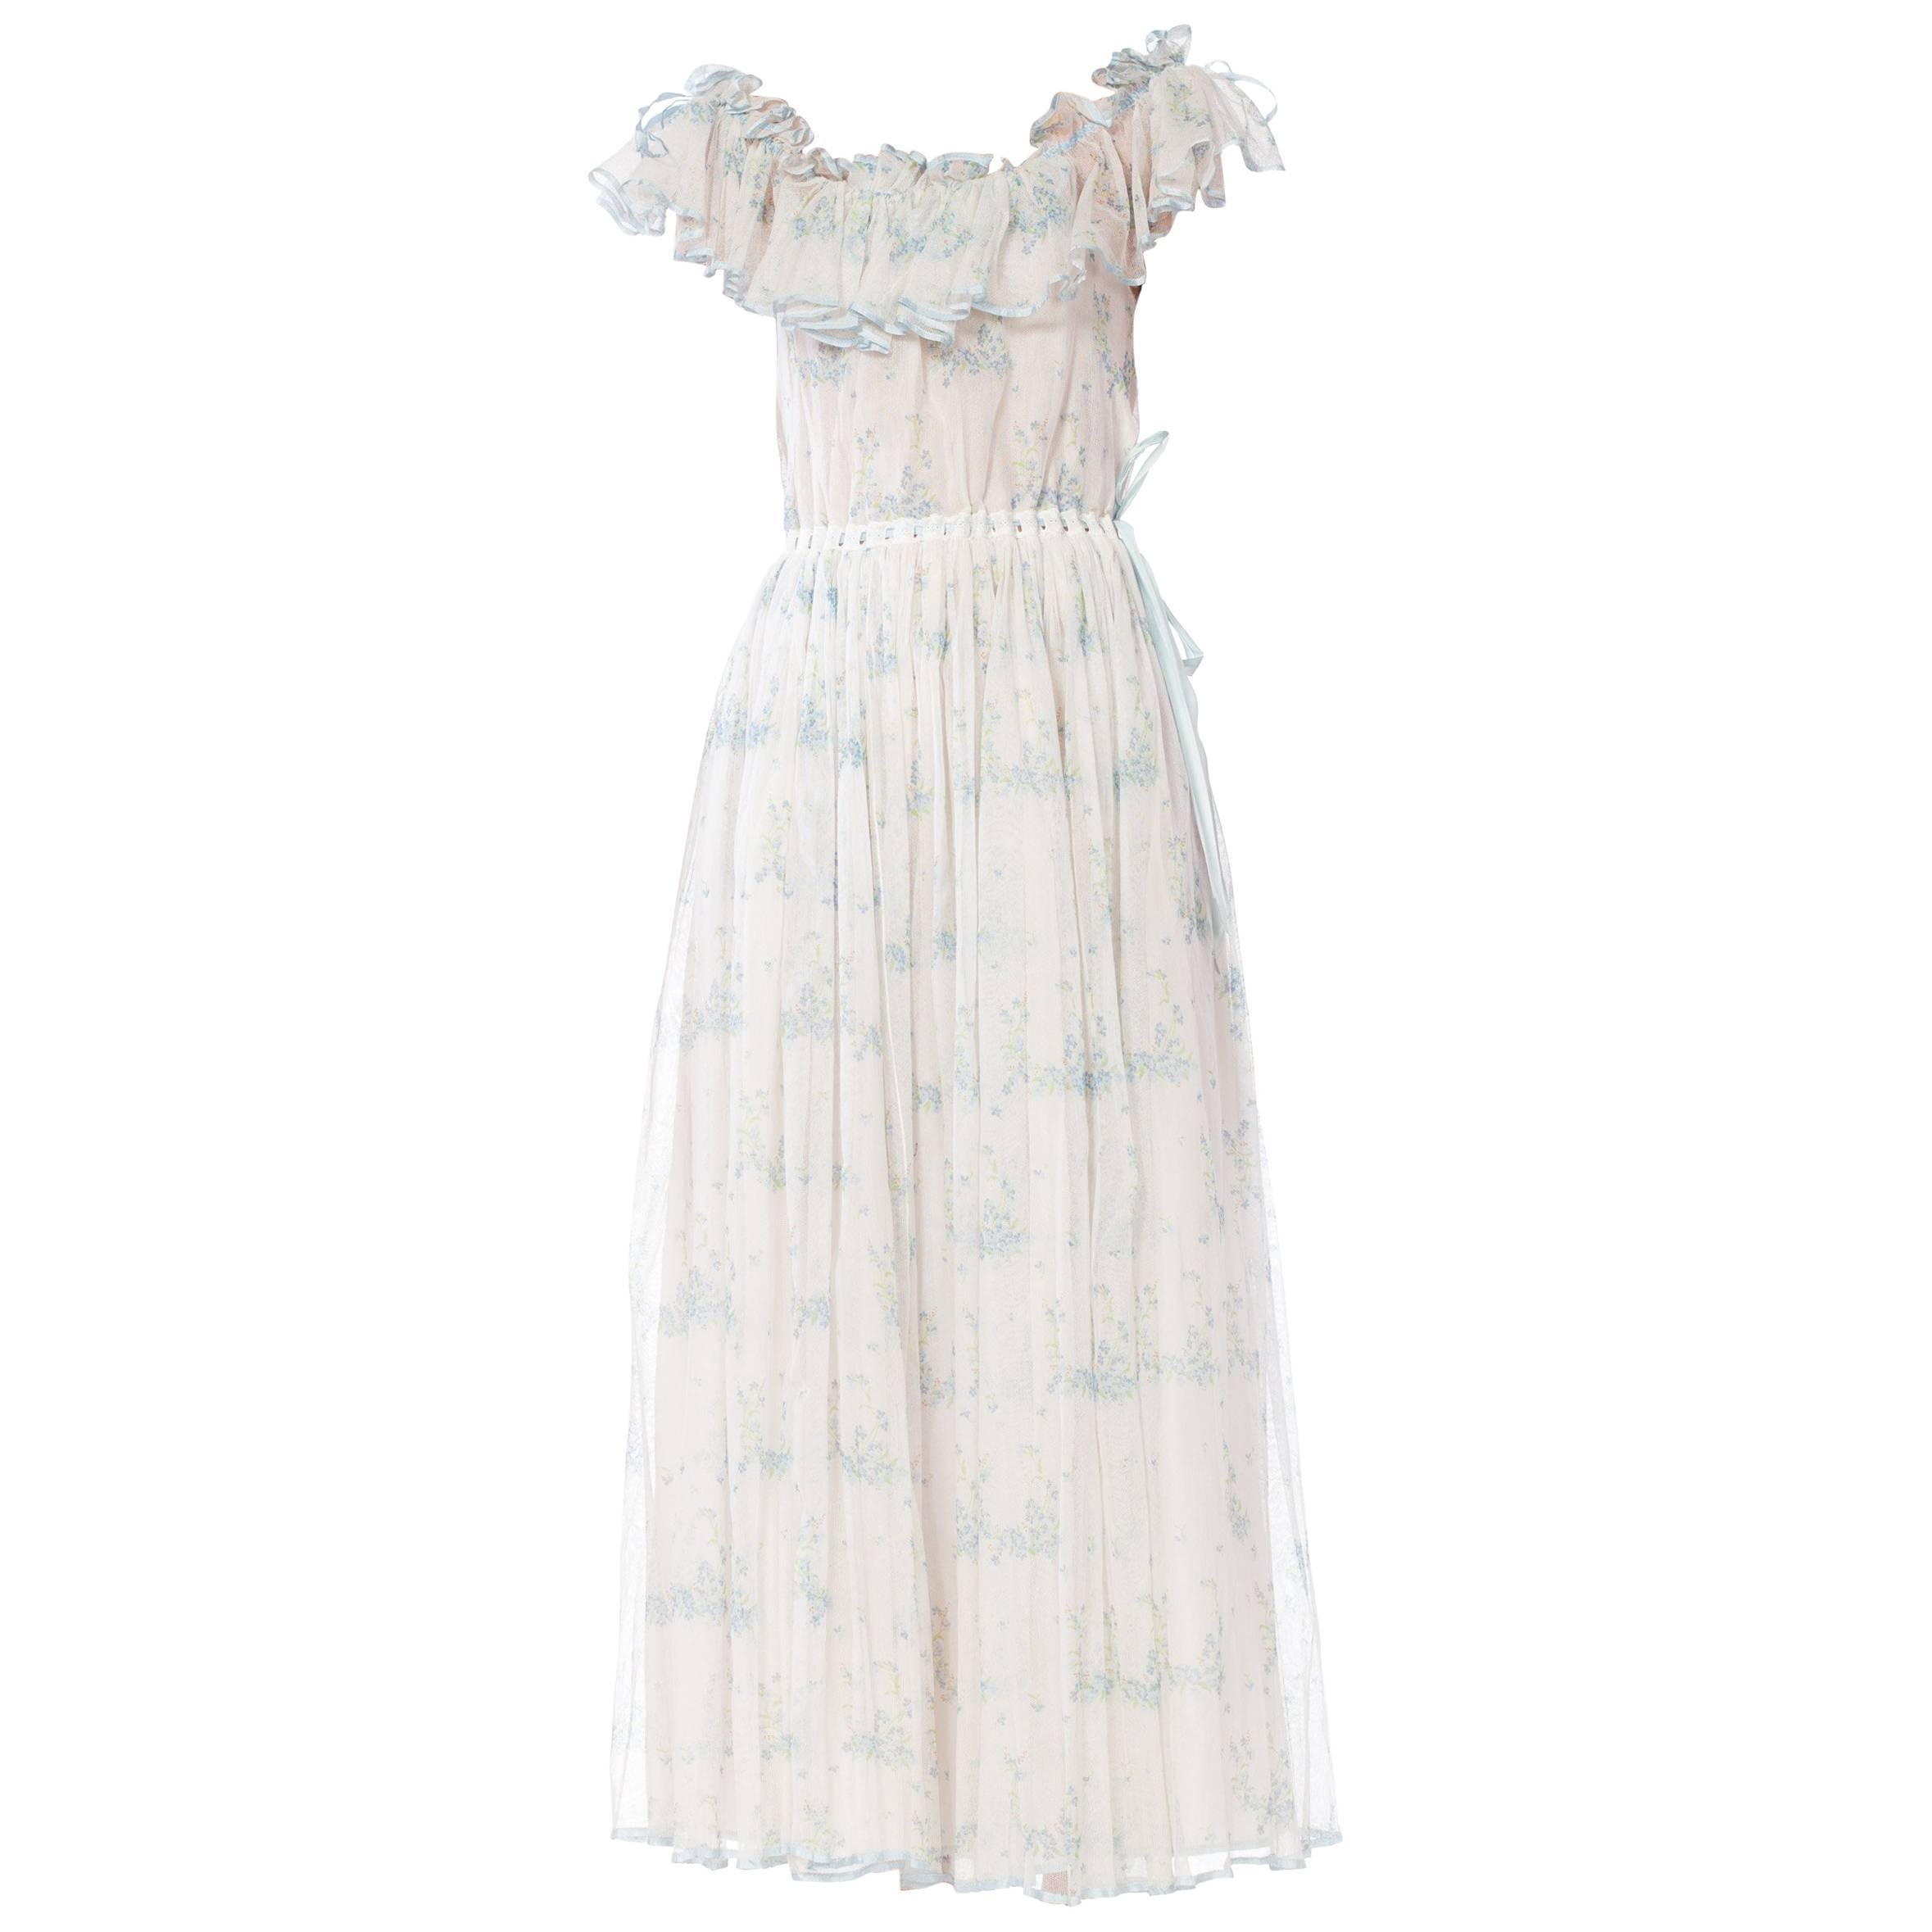 1970S Pale Blue Floral Printed Cotton Tulle Ruffled Maxi Dress Lined In Silk